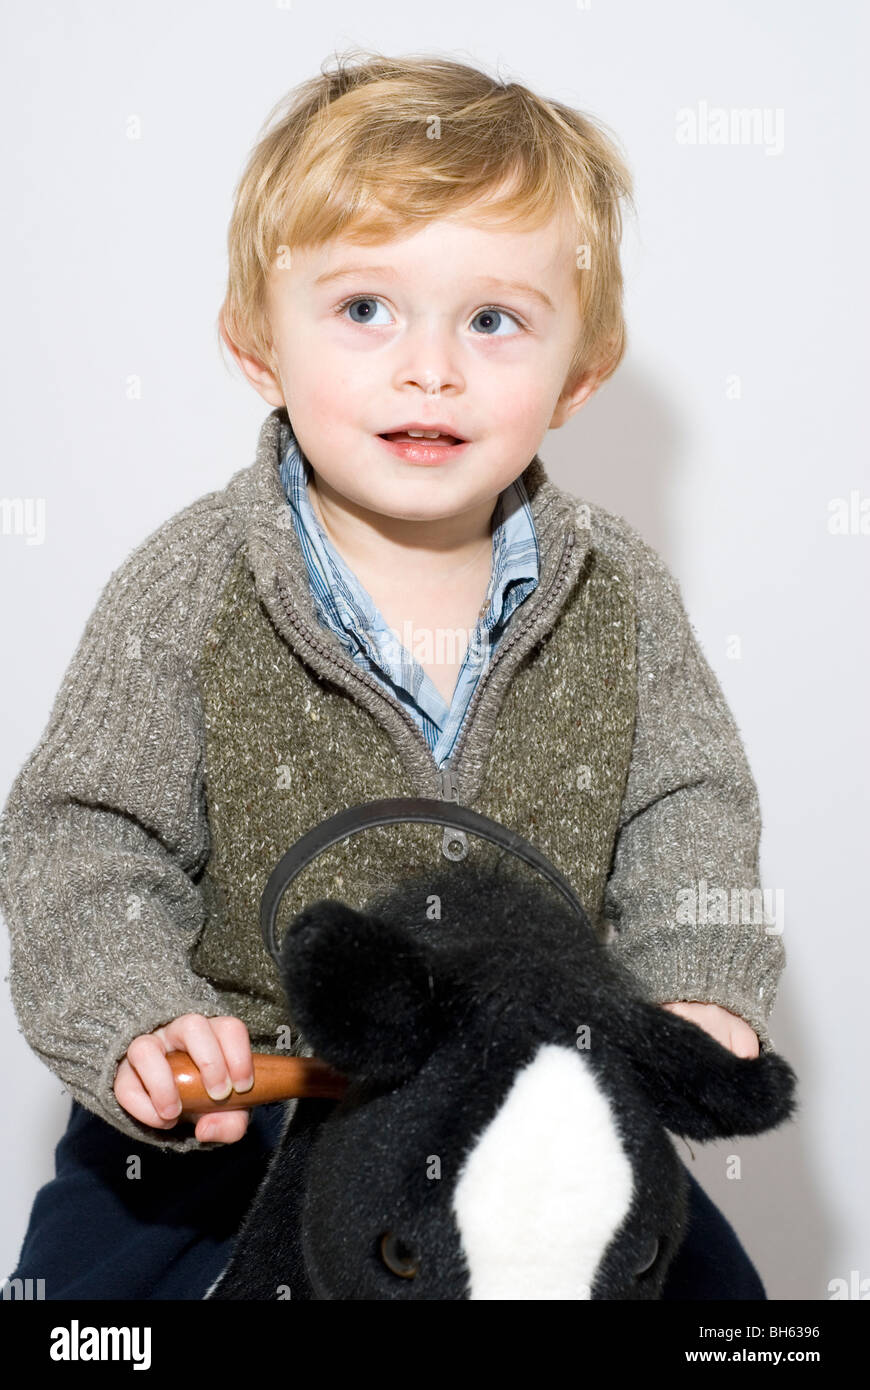 Portrait of Toddler Boy Aged 20 Months Riding on Rocking Horse Isolated on White Stock Photo